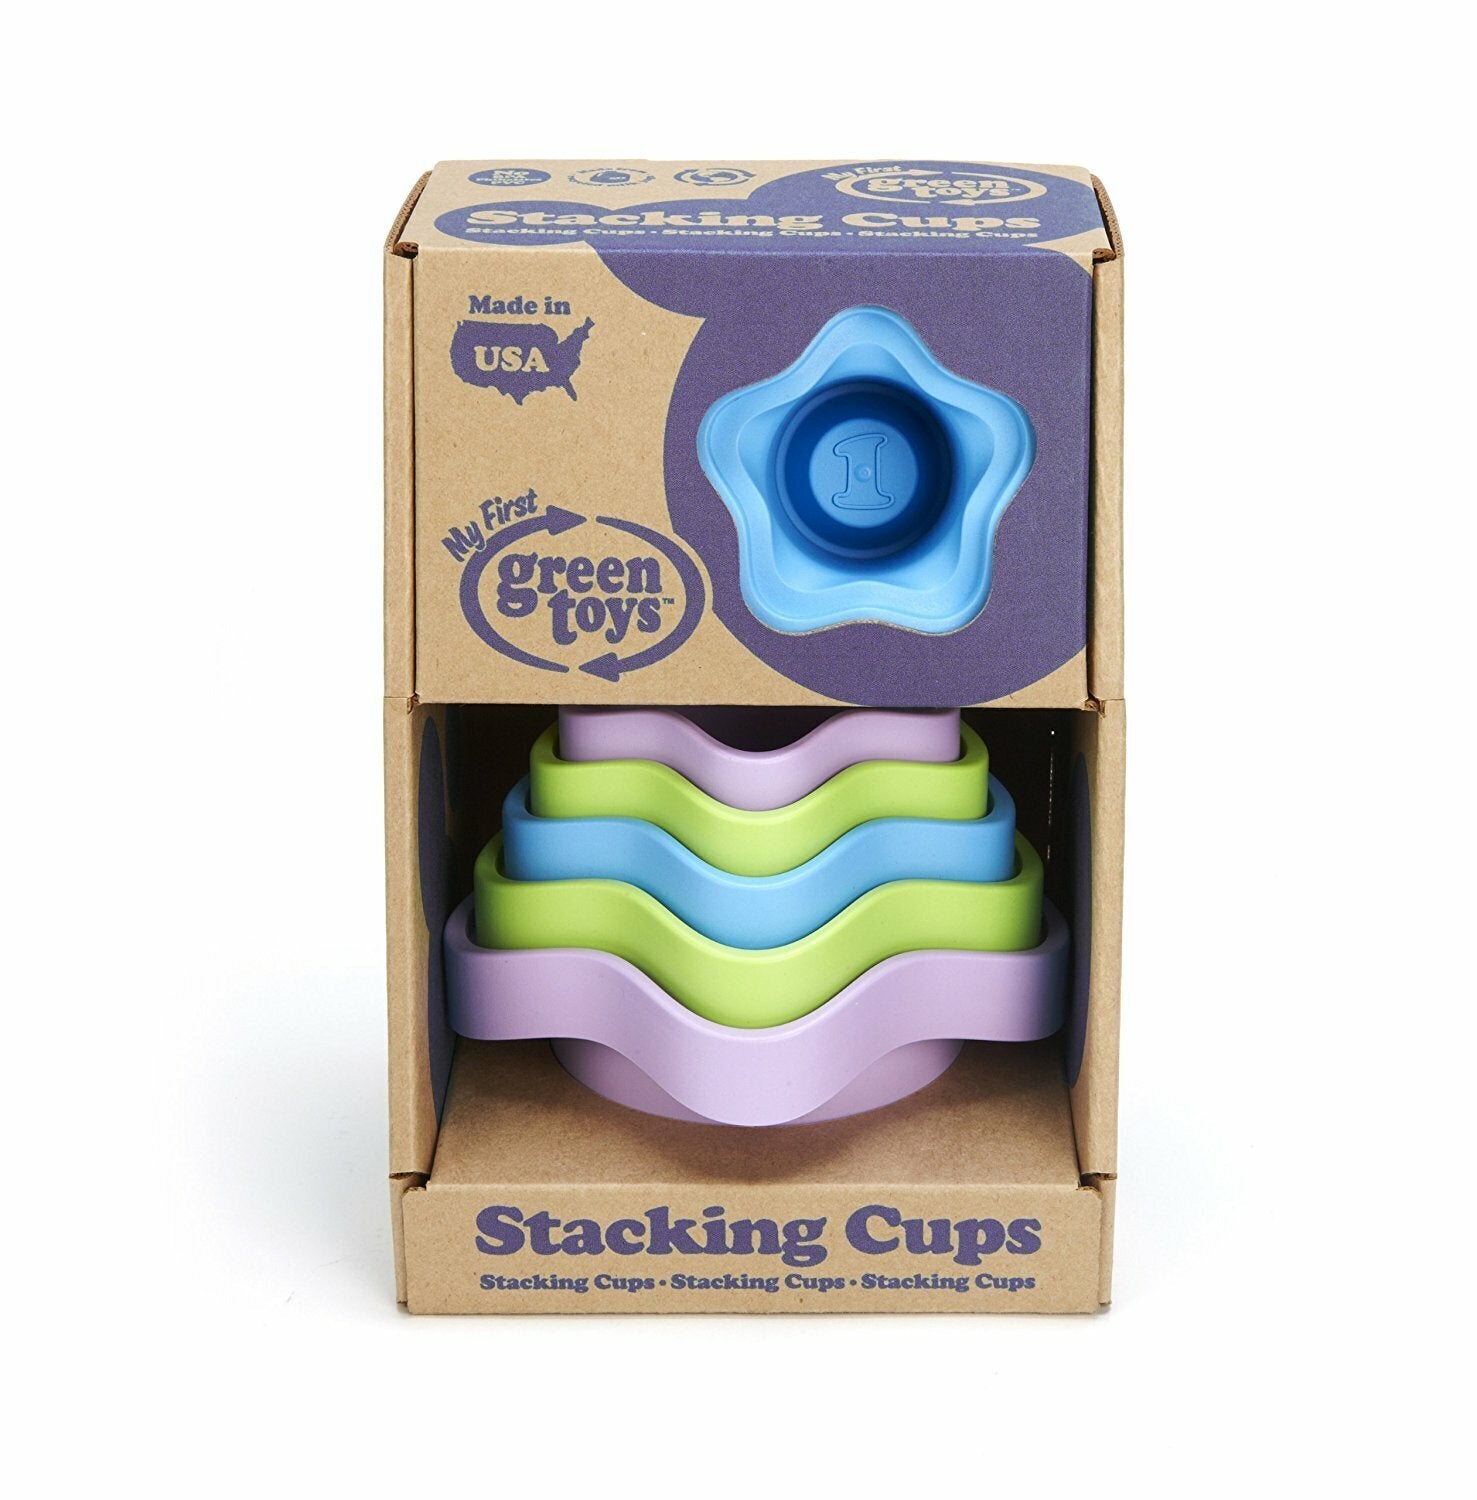 Green Toys: pyramid of cups